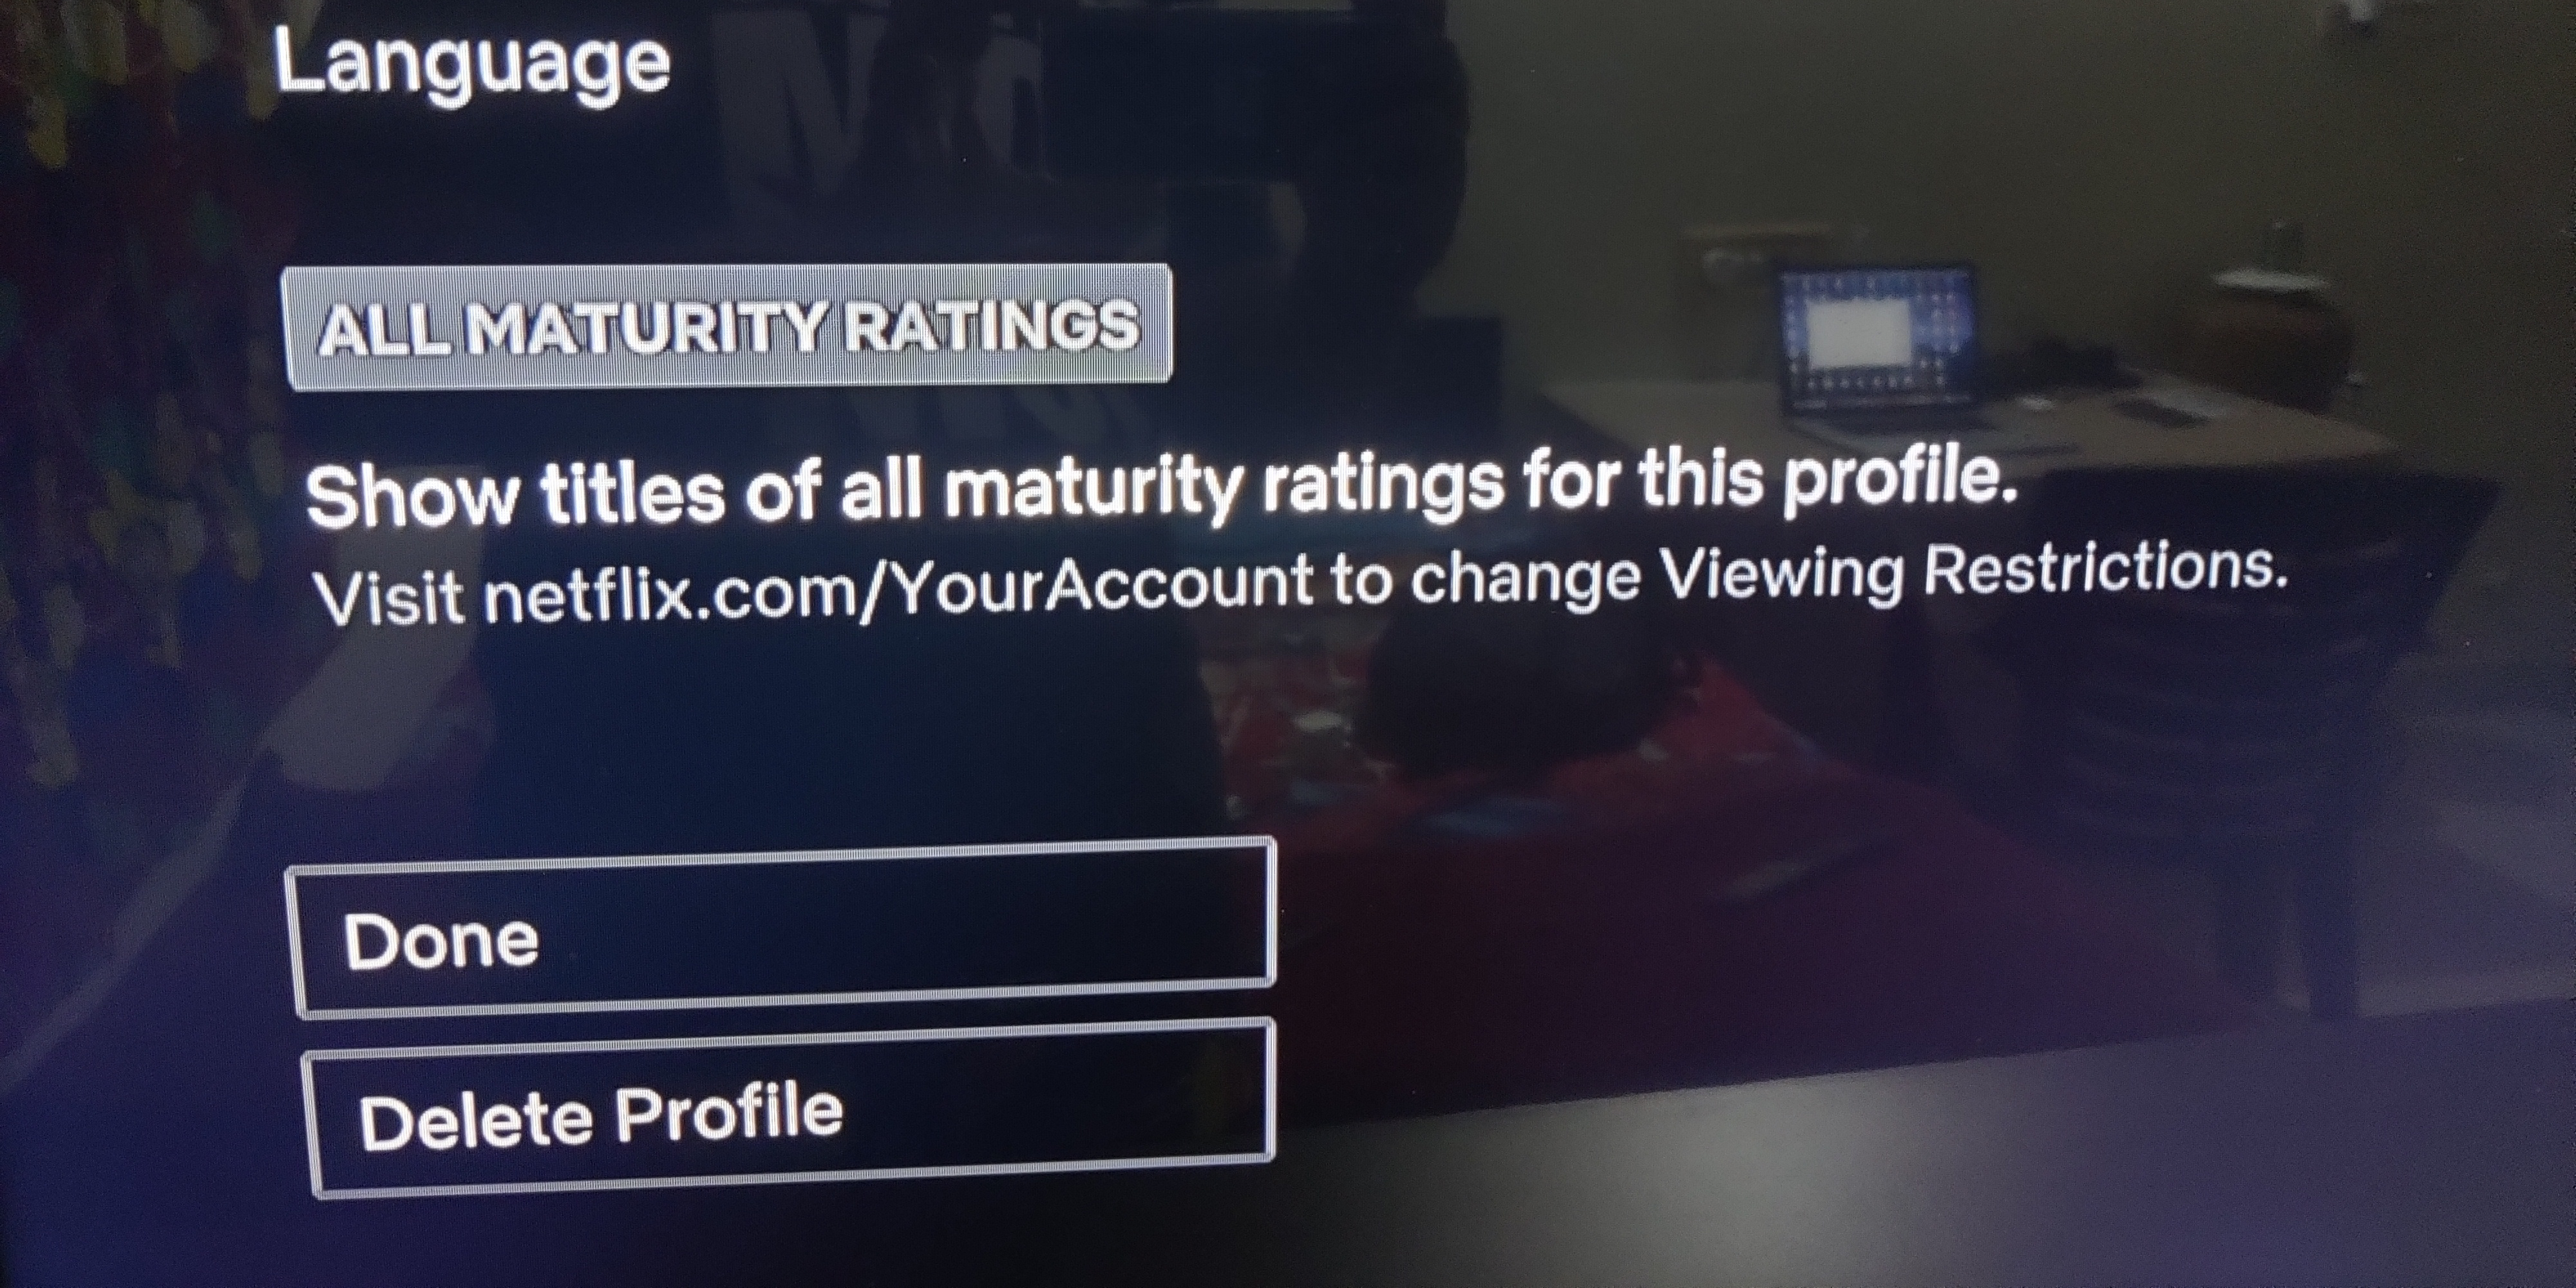 how to delete a profile on netflix app